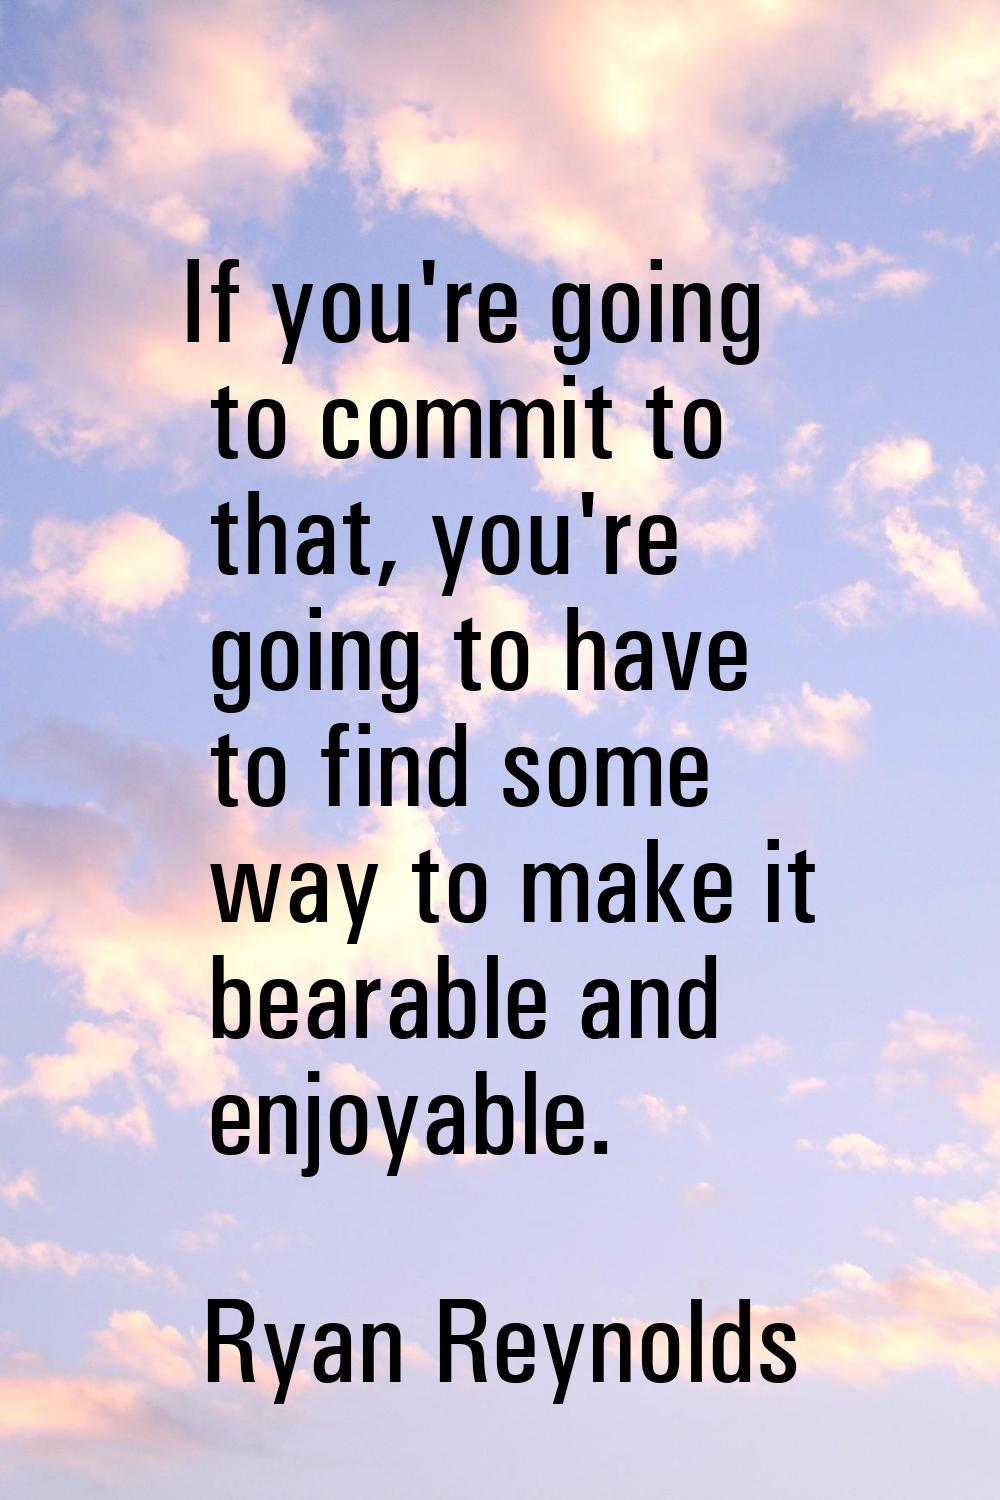 If you're going to commit to that, you're going to have to find some way to make it bearable and en